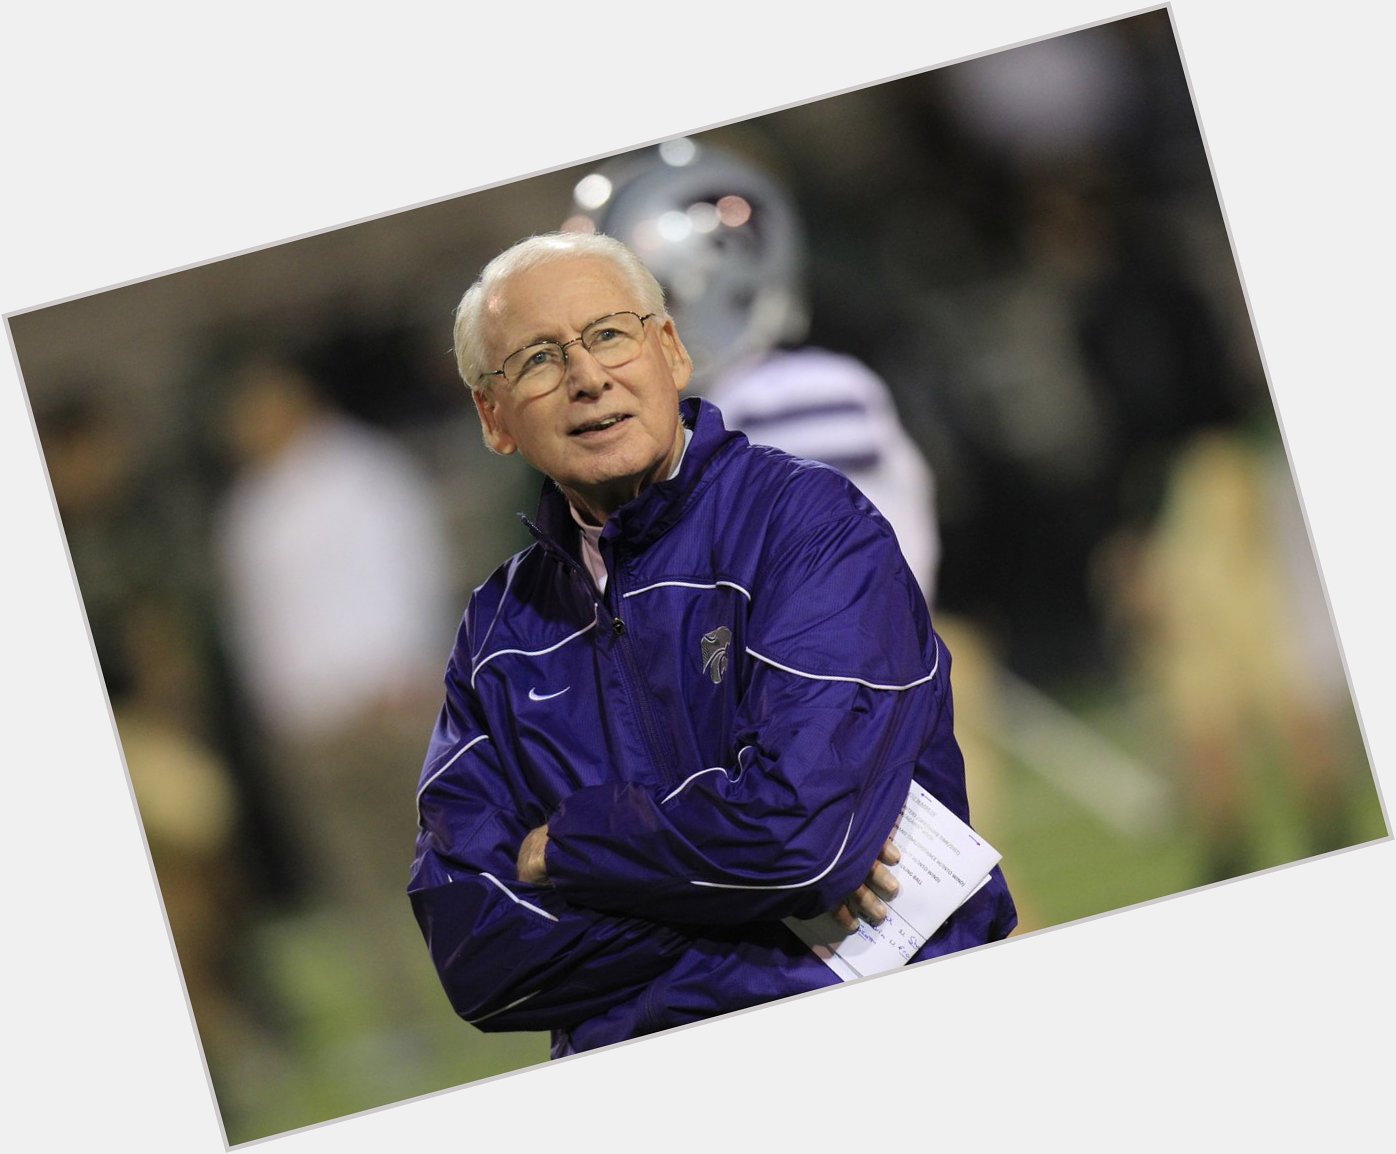 Happy 78th birthday, Bill Snyder.

In his career, Snyder is 2-2 on his birthday. 